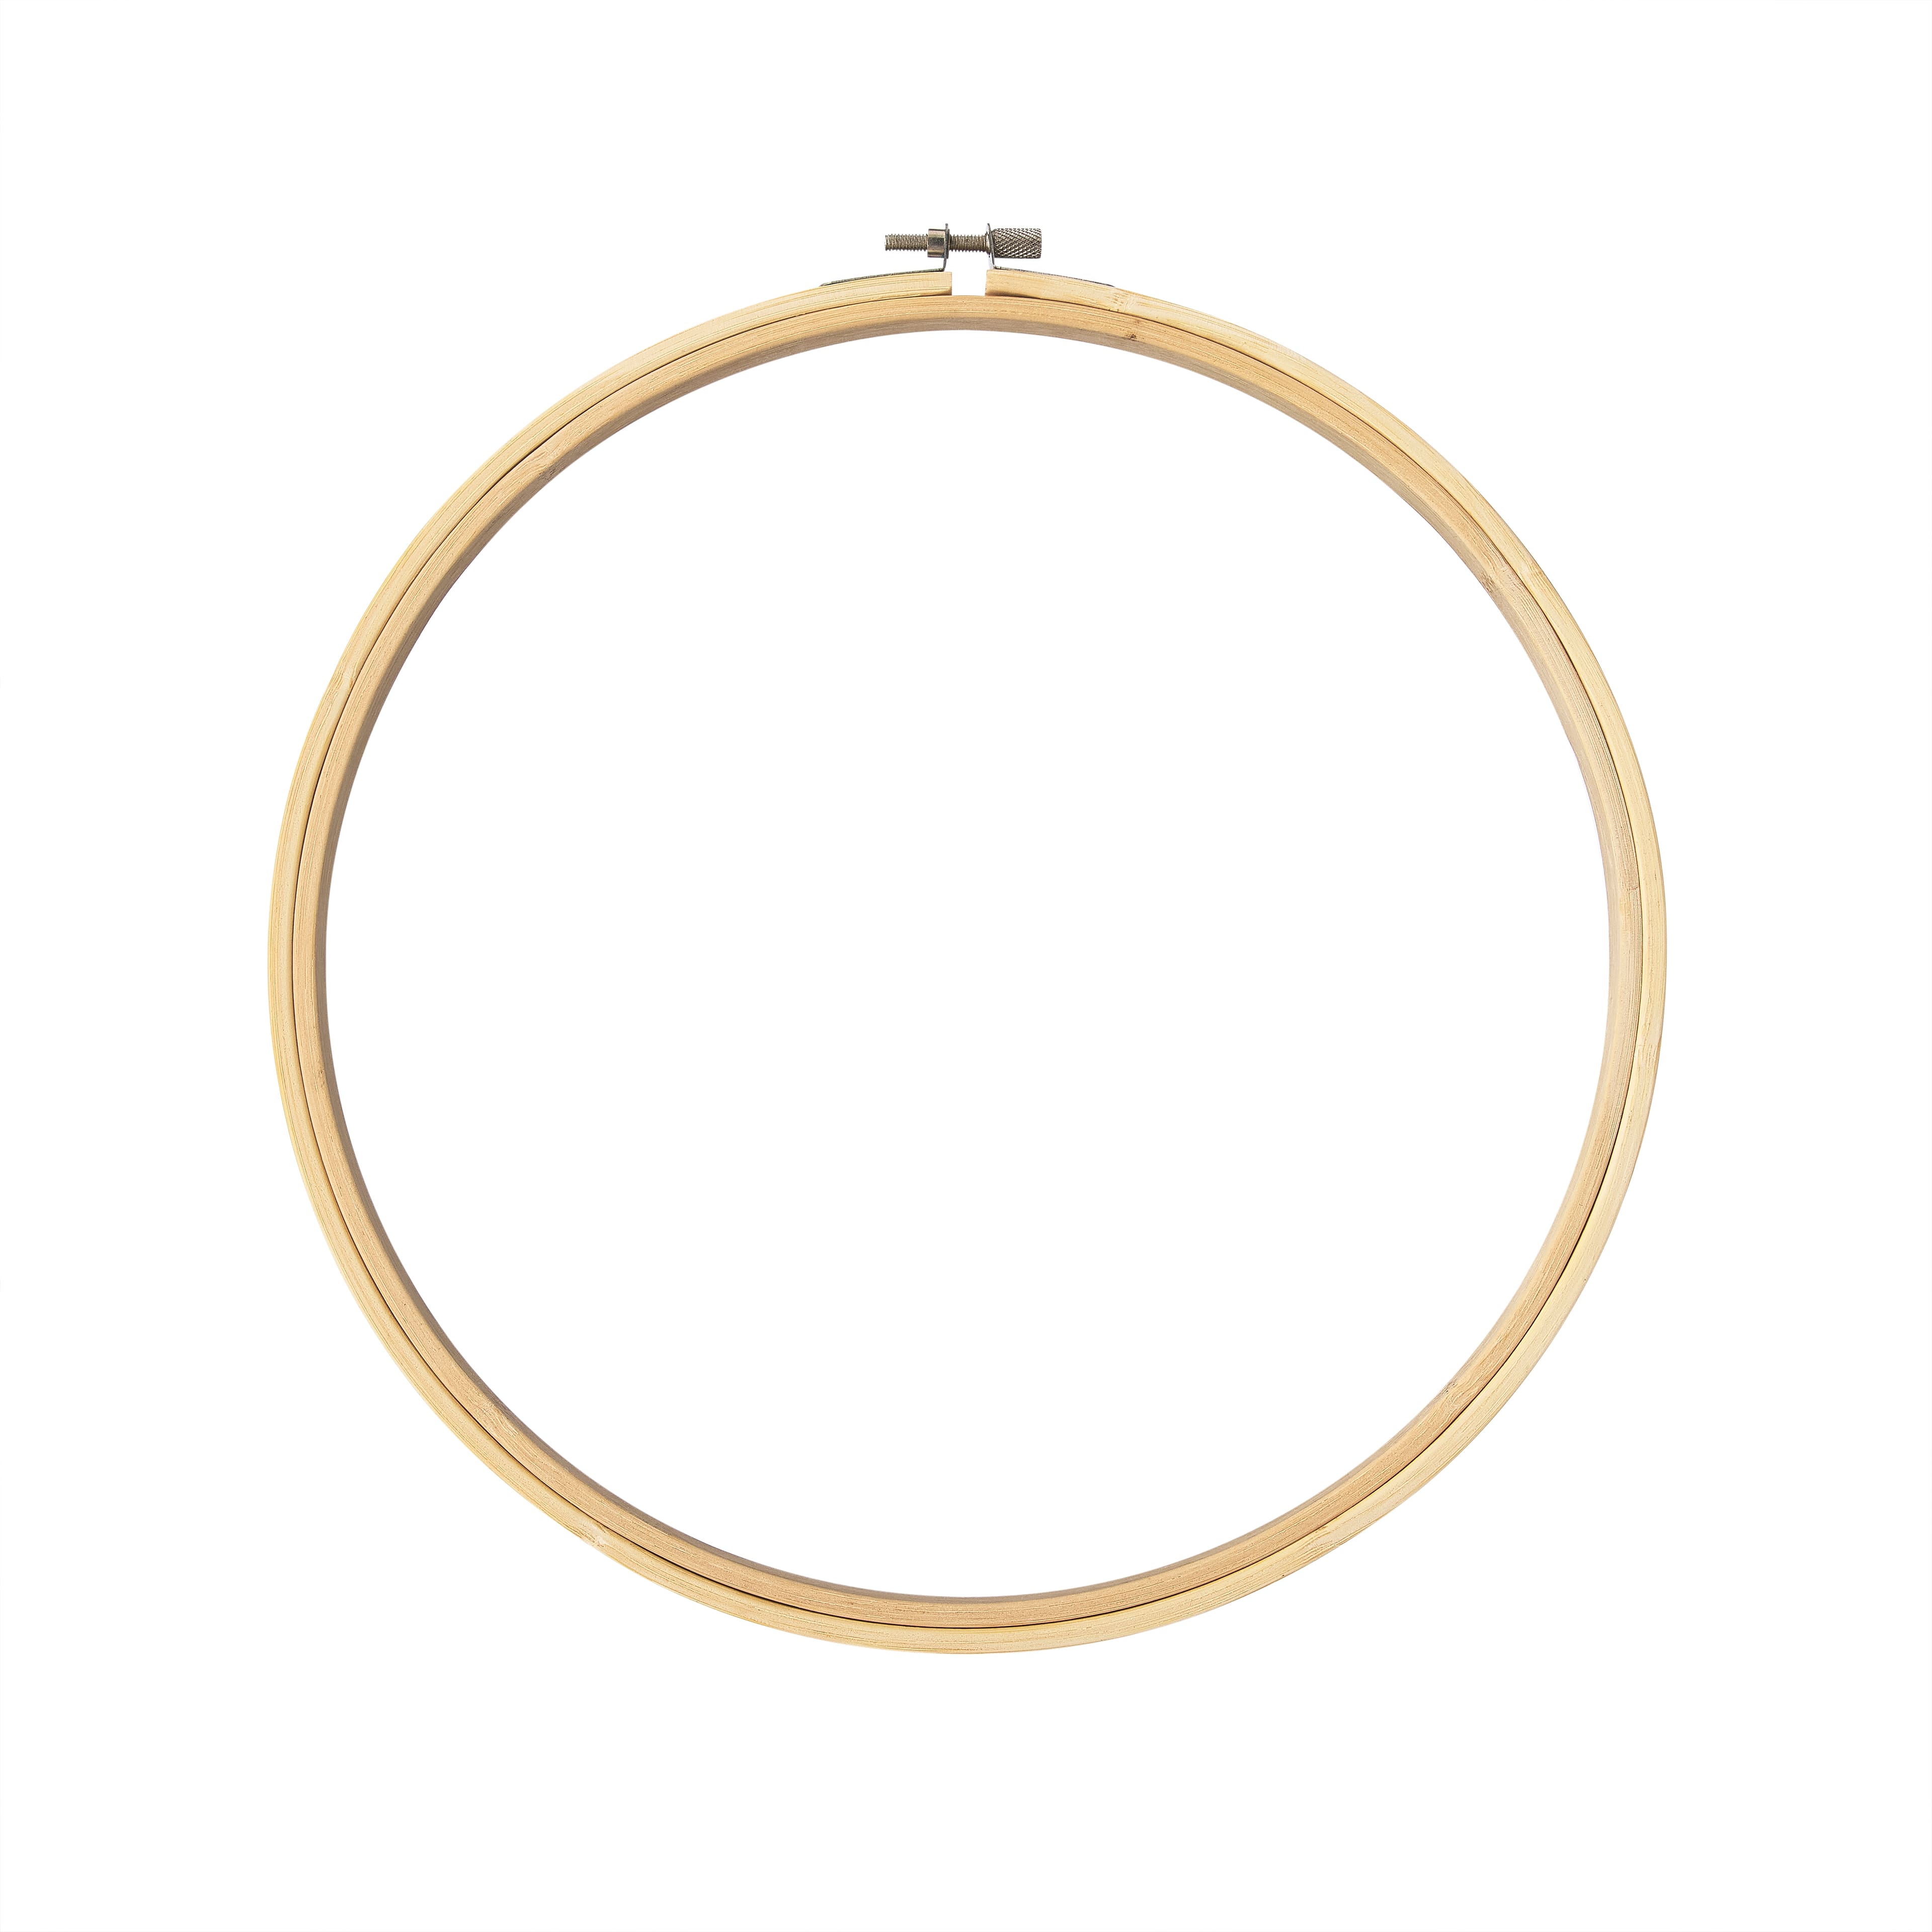 6 inch Round Hand Wooden Embroidery Hoop 1 Piece 